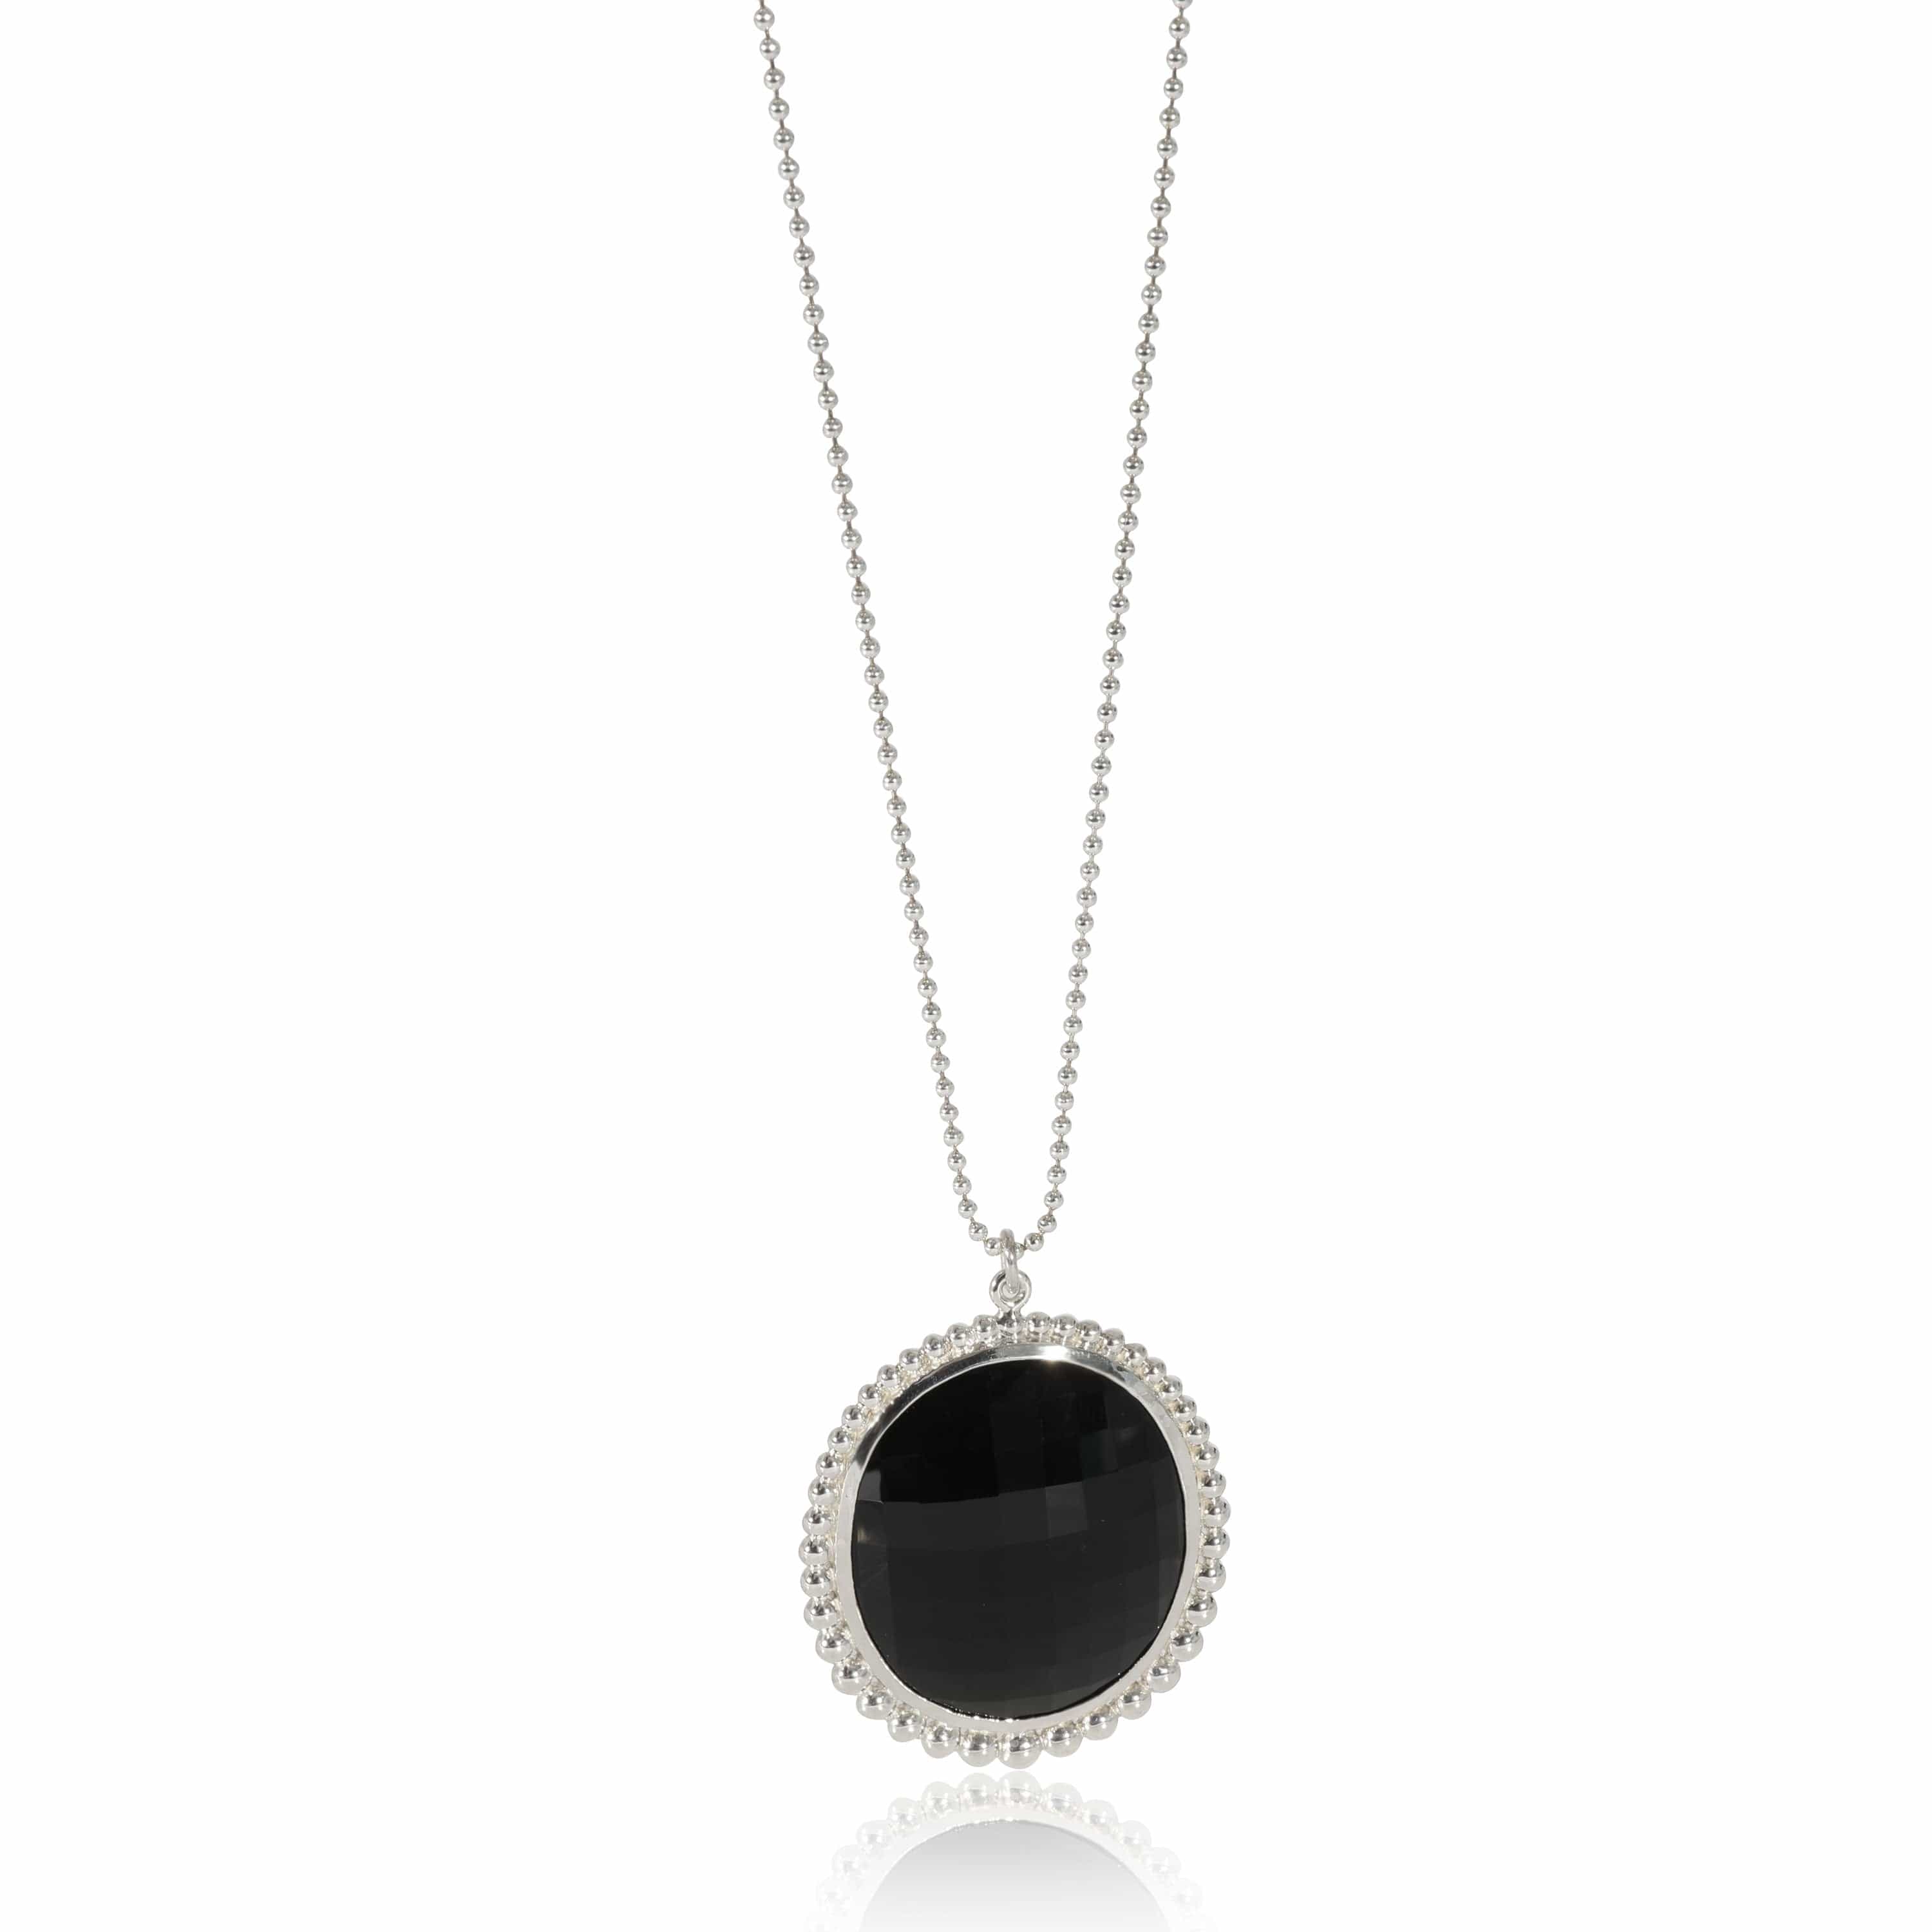 Tiffany & Co. Tiffany & Co. Onyx Necklace in  Sterling Silver Black